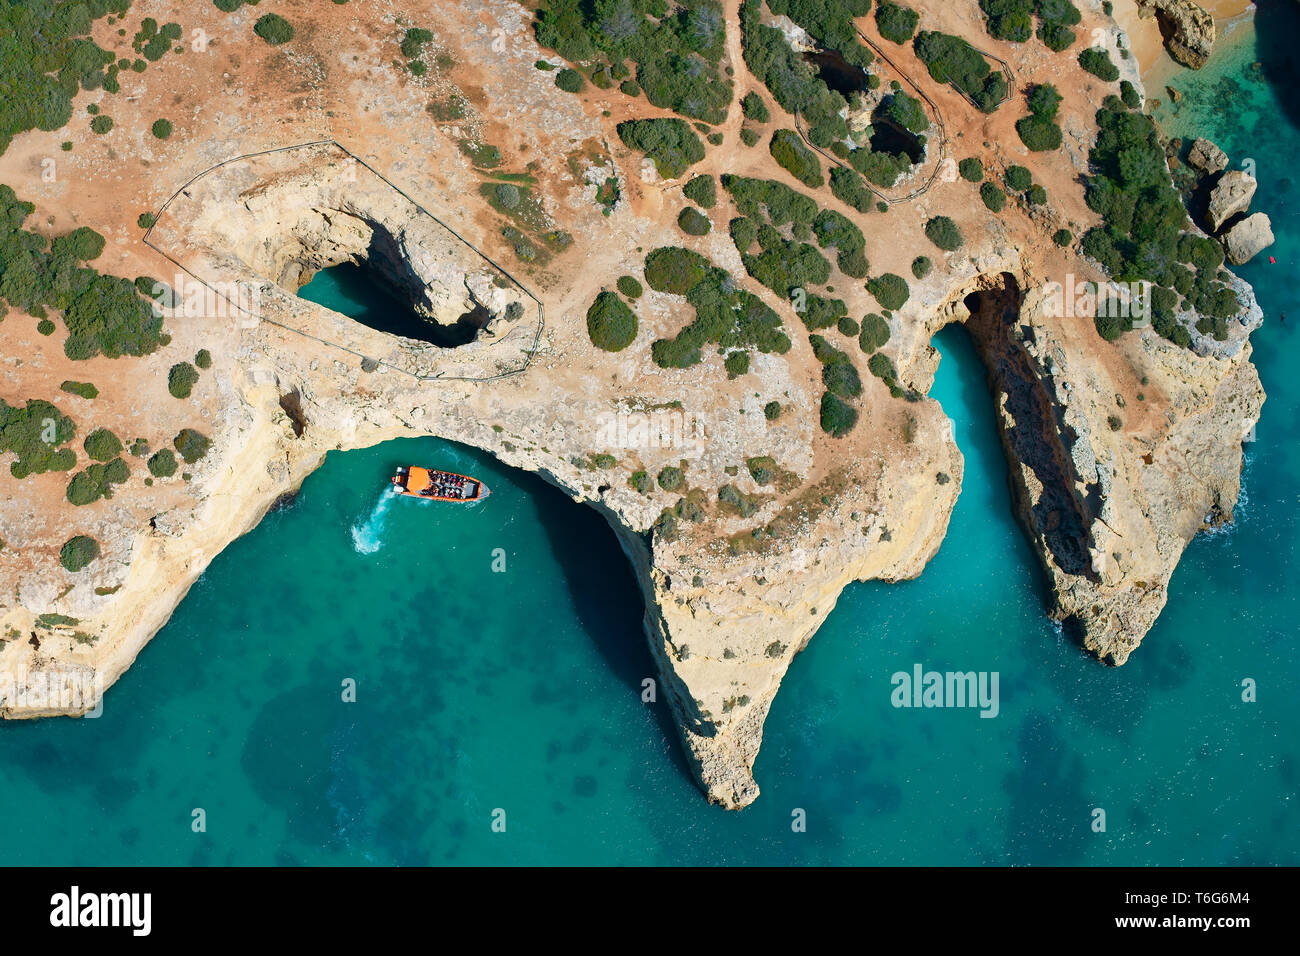 AERIAL VIEW. Sightseeing boat approaching a sea cave / sinkhole on the rocky coastline near Albandeira. Lagoa, Algarve, Portugal. Stock Photo